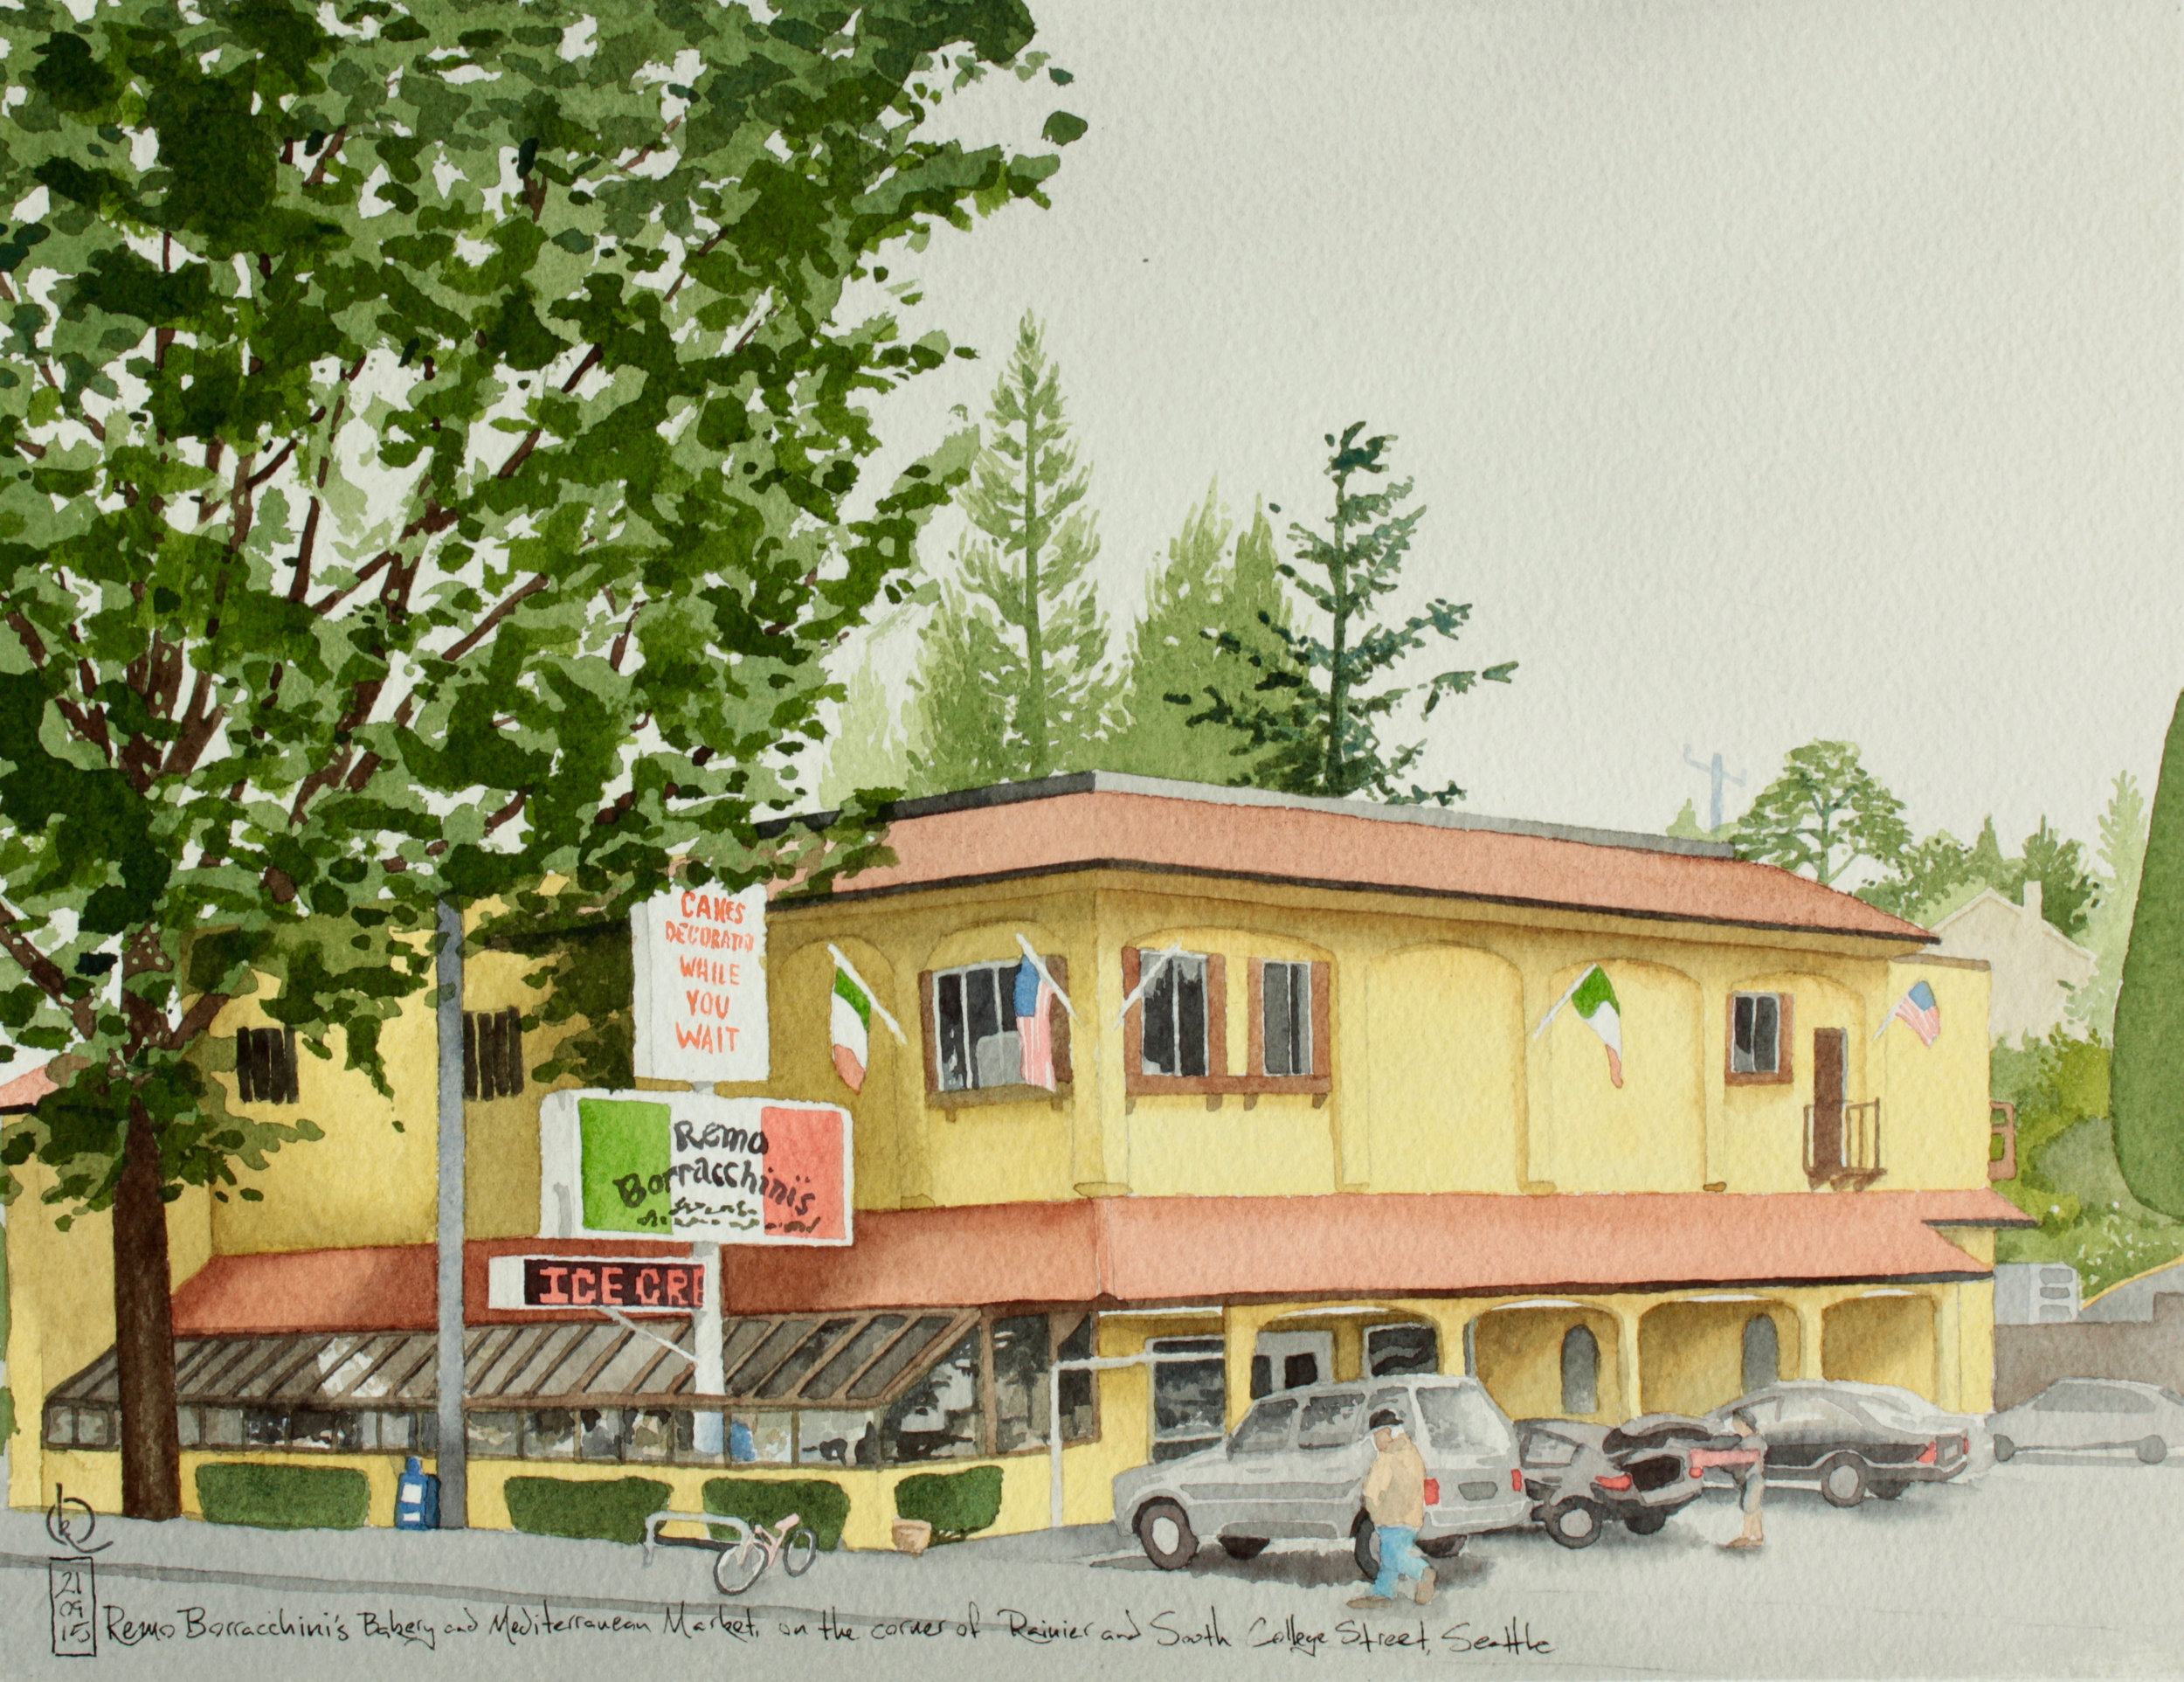 Remo Borracchini’s Bakery and Mediterranean Market, on the corner of Rainier and South College Street, Seattle